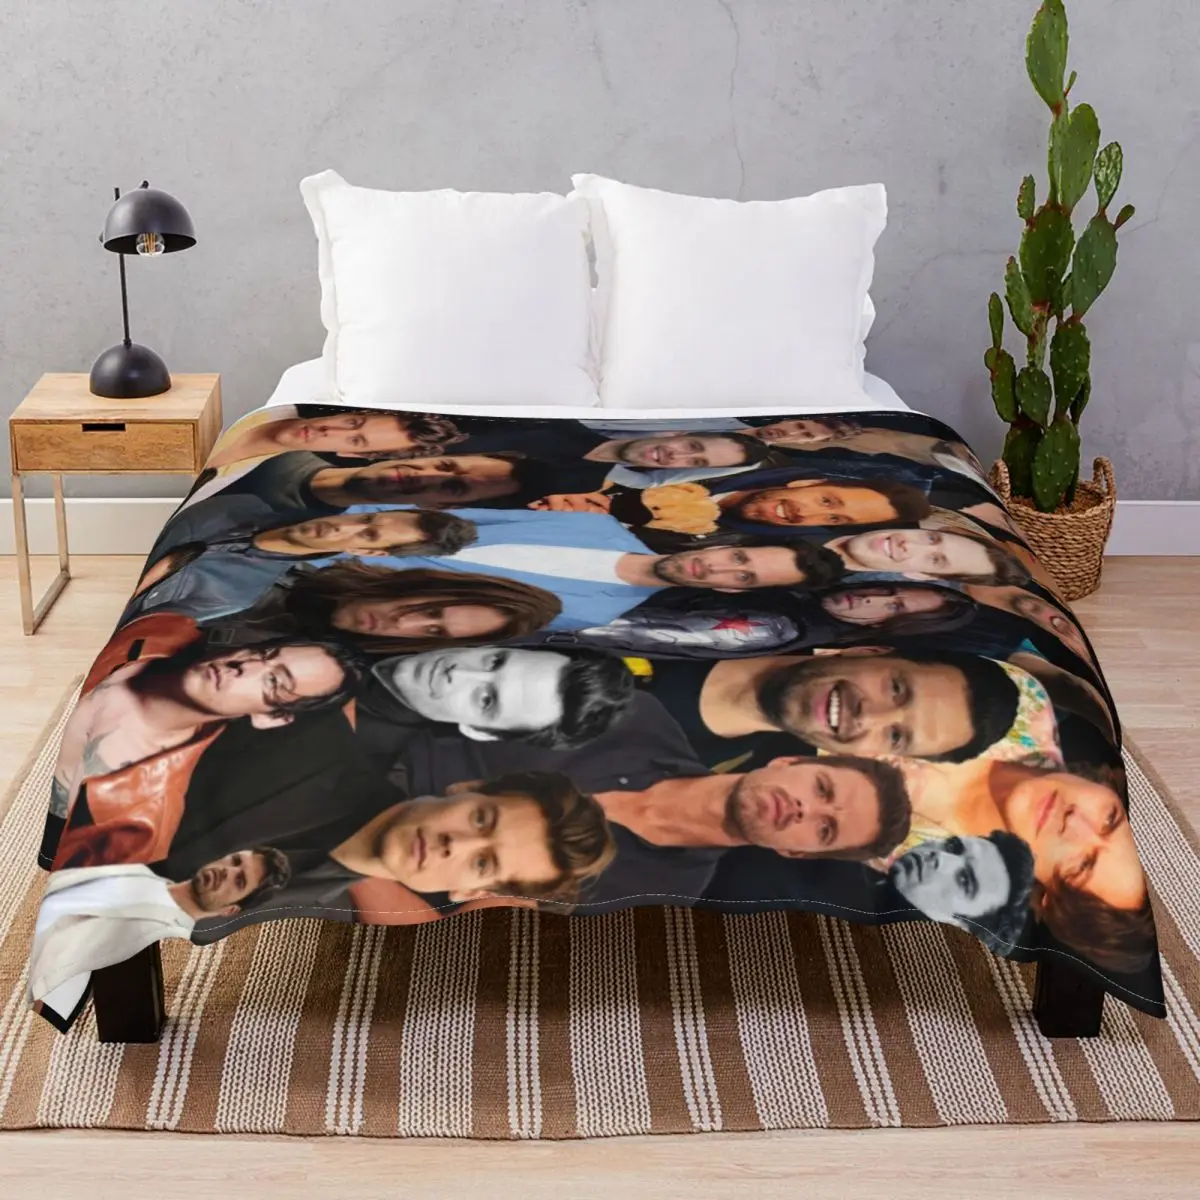 Seb Harry Collage Blankets Flannel Textile Decor Fluffy Throw Blanket for Bedding Home Couch Travel Cinema